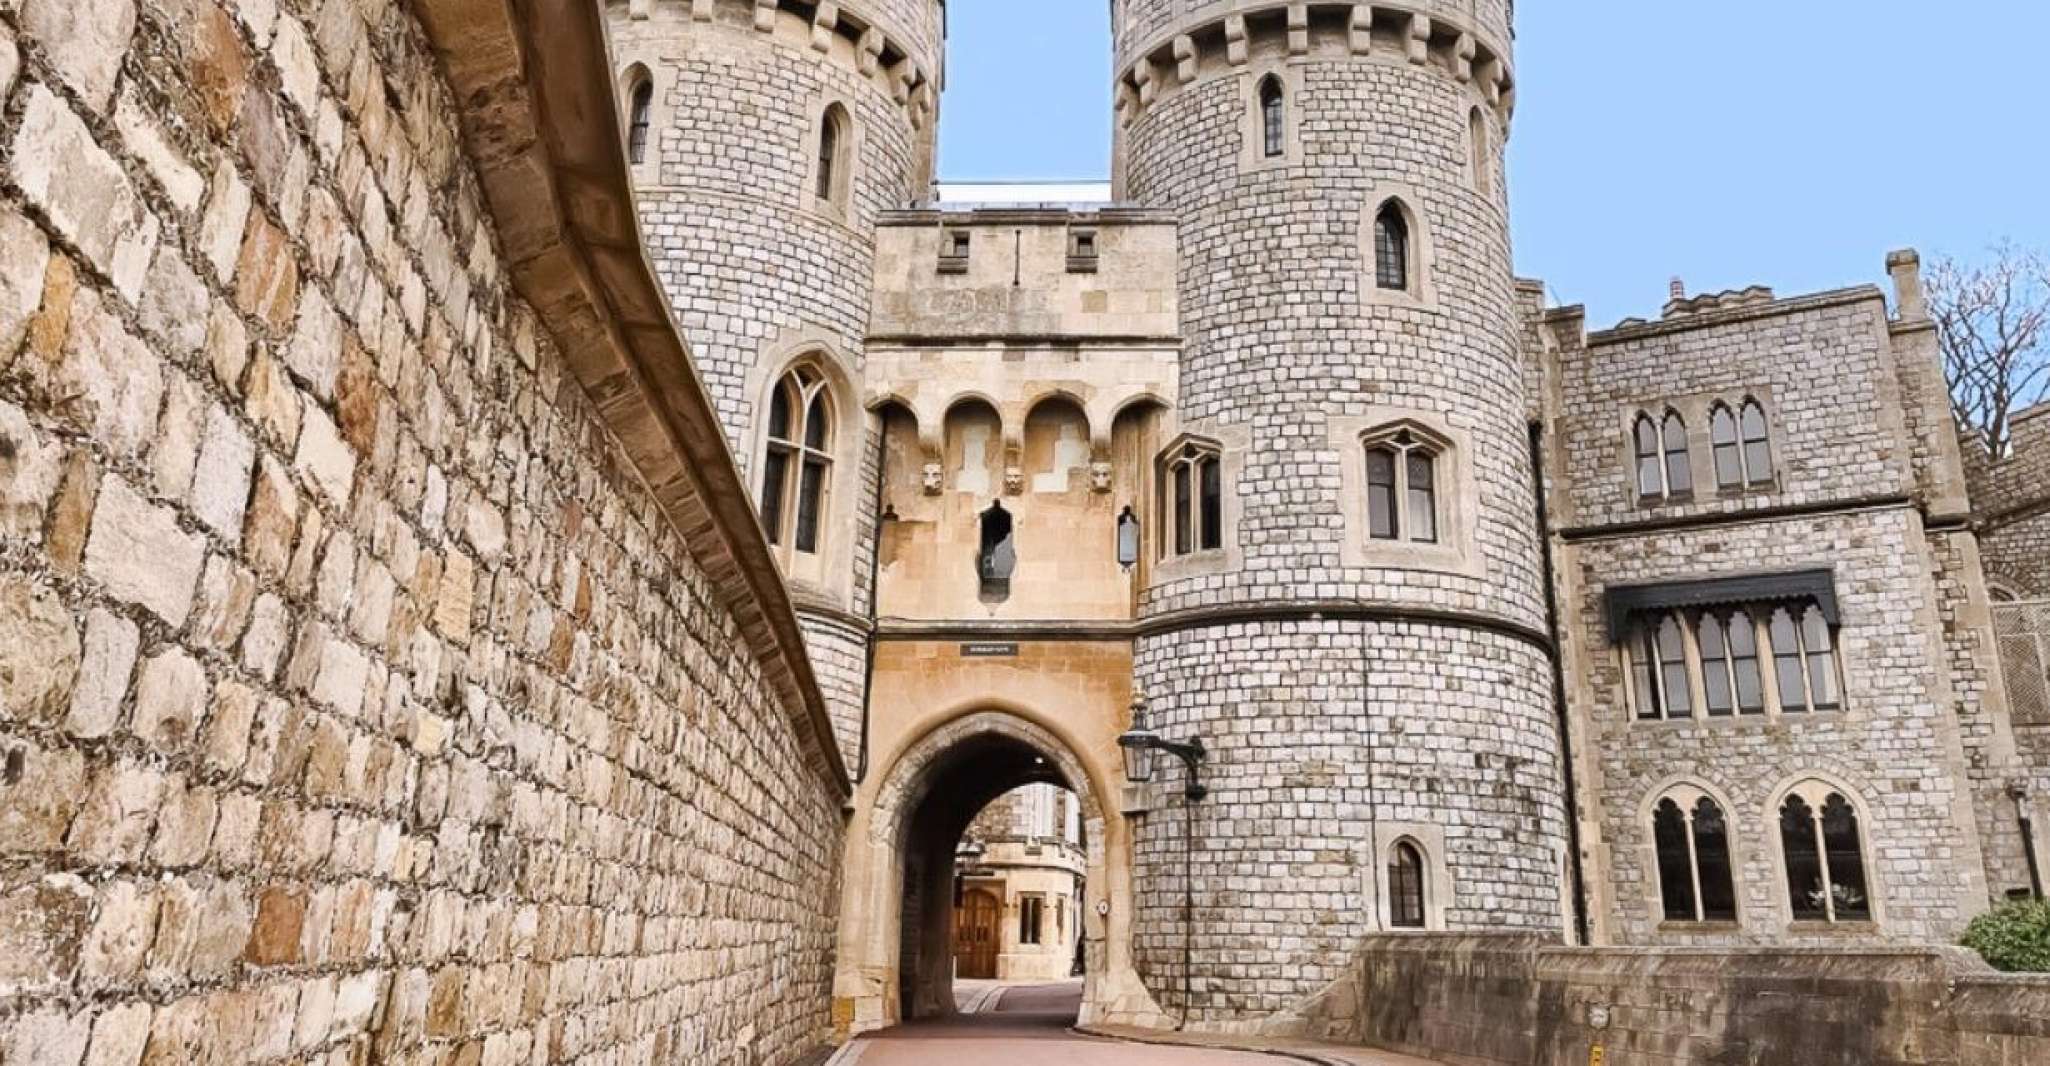 From London, Half-Day Trip to Windsor with Castle Tickets - Housity